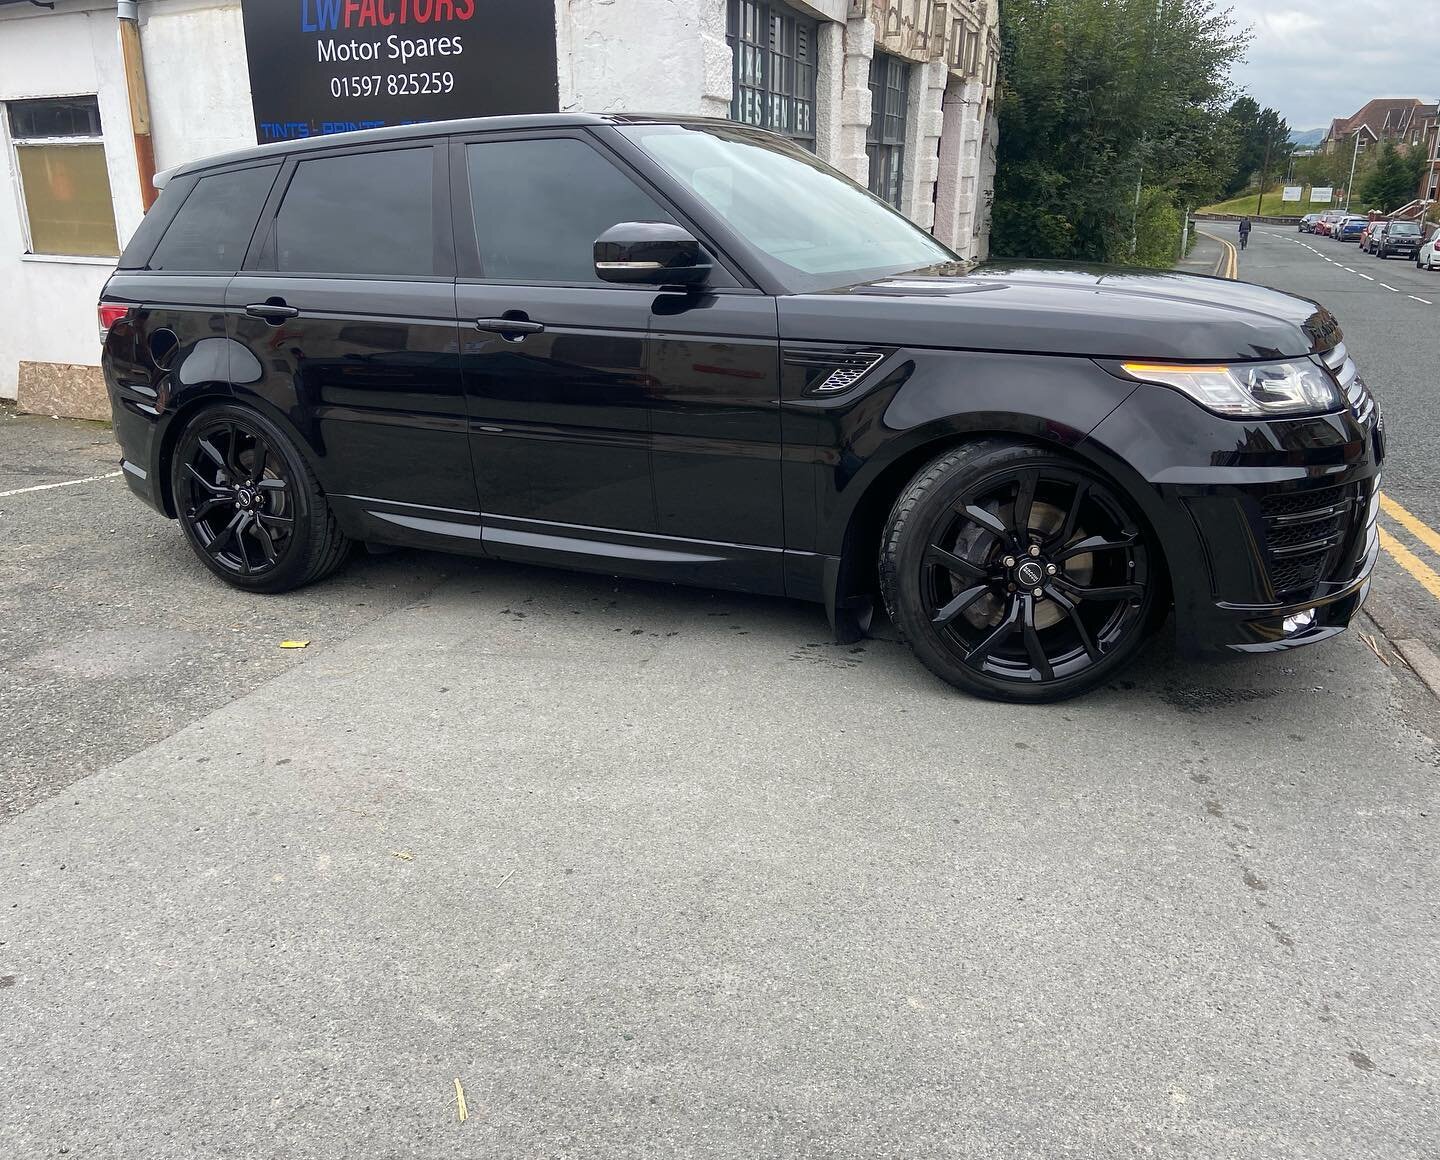 Blacked Out Range Rover Sport in for some Window Tinting 🔥 #tints #signs #banners